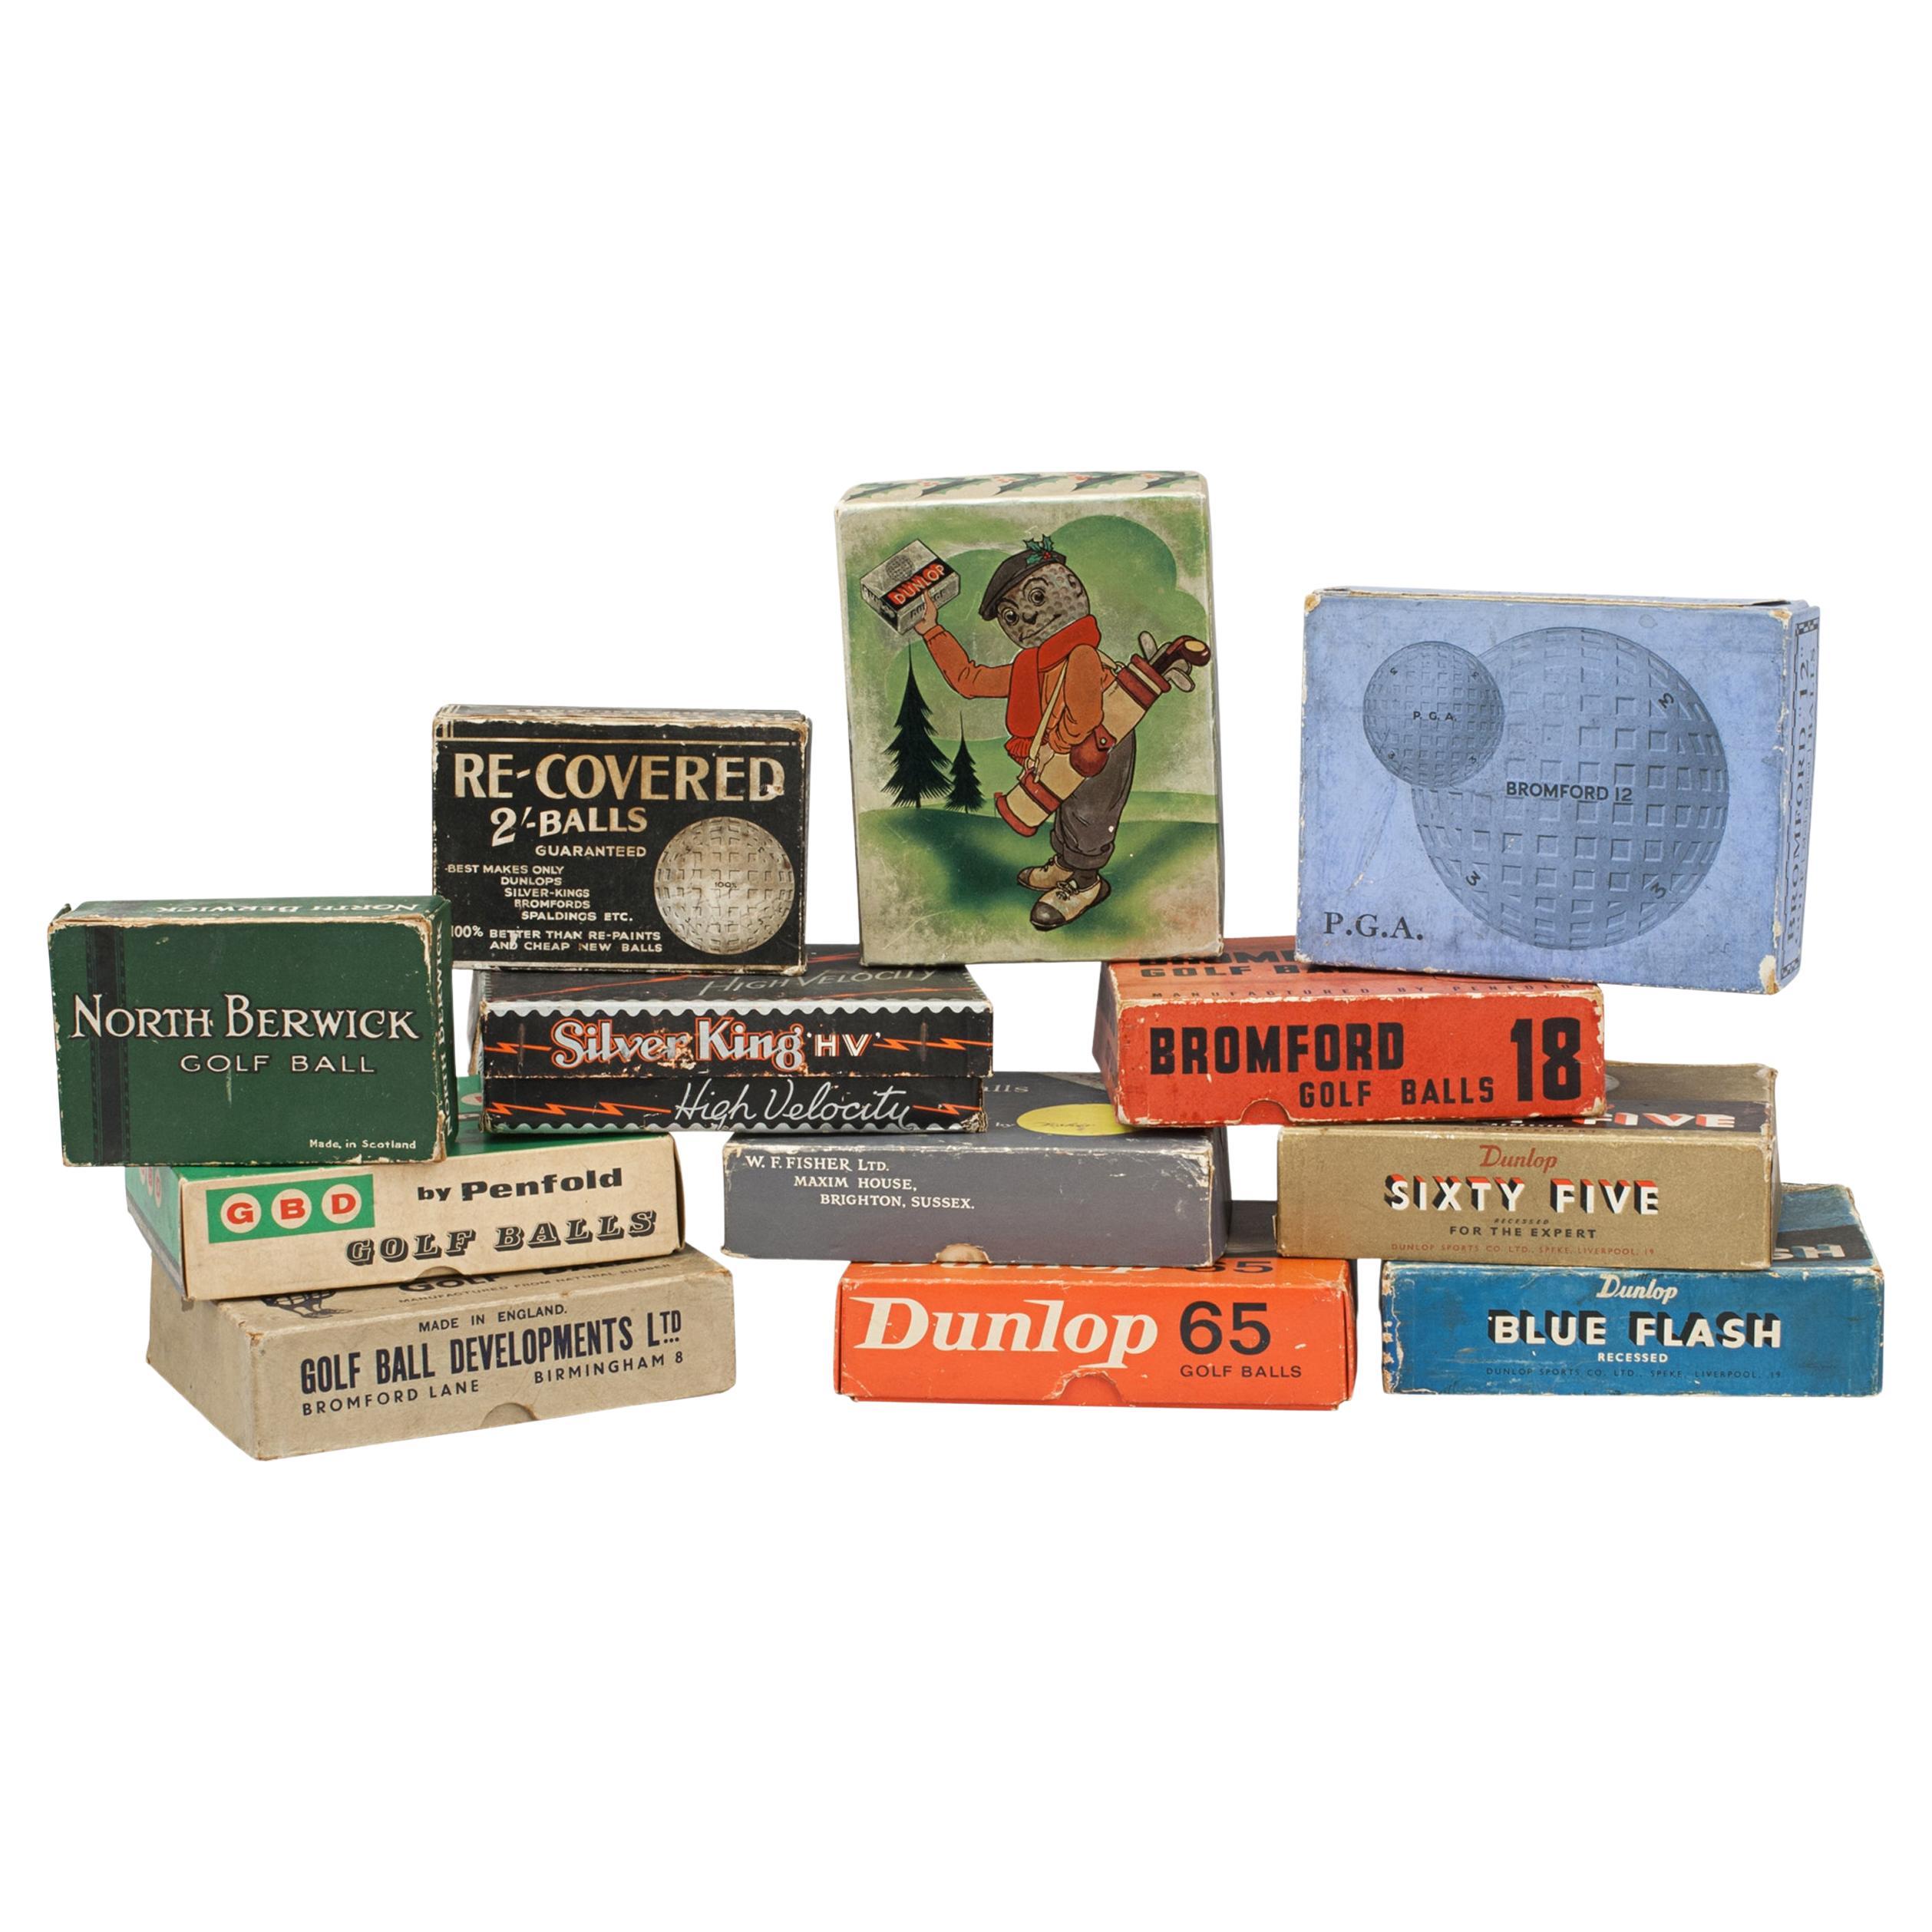 Collection of 12 Original Golf Ball Boxes. Silver King, North Berwick etc.